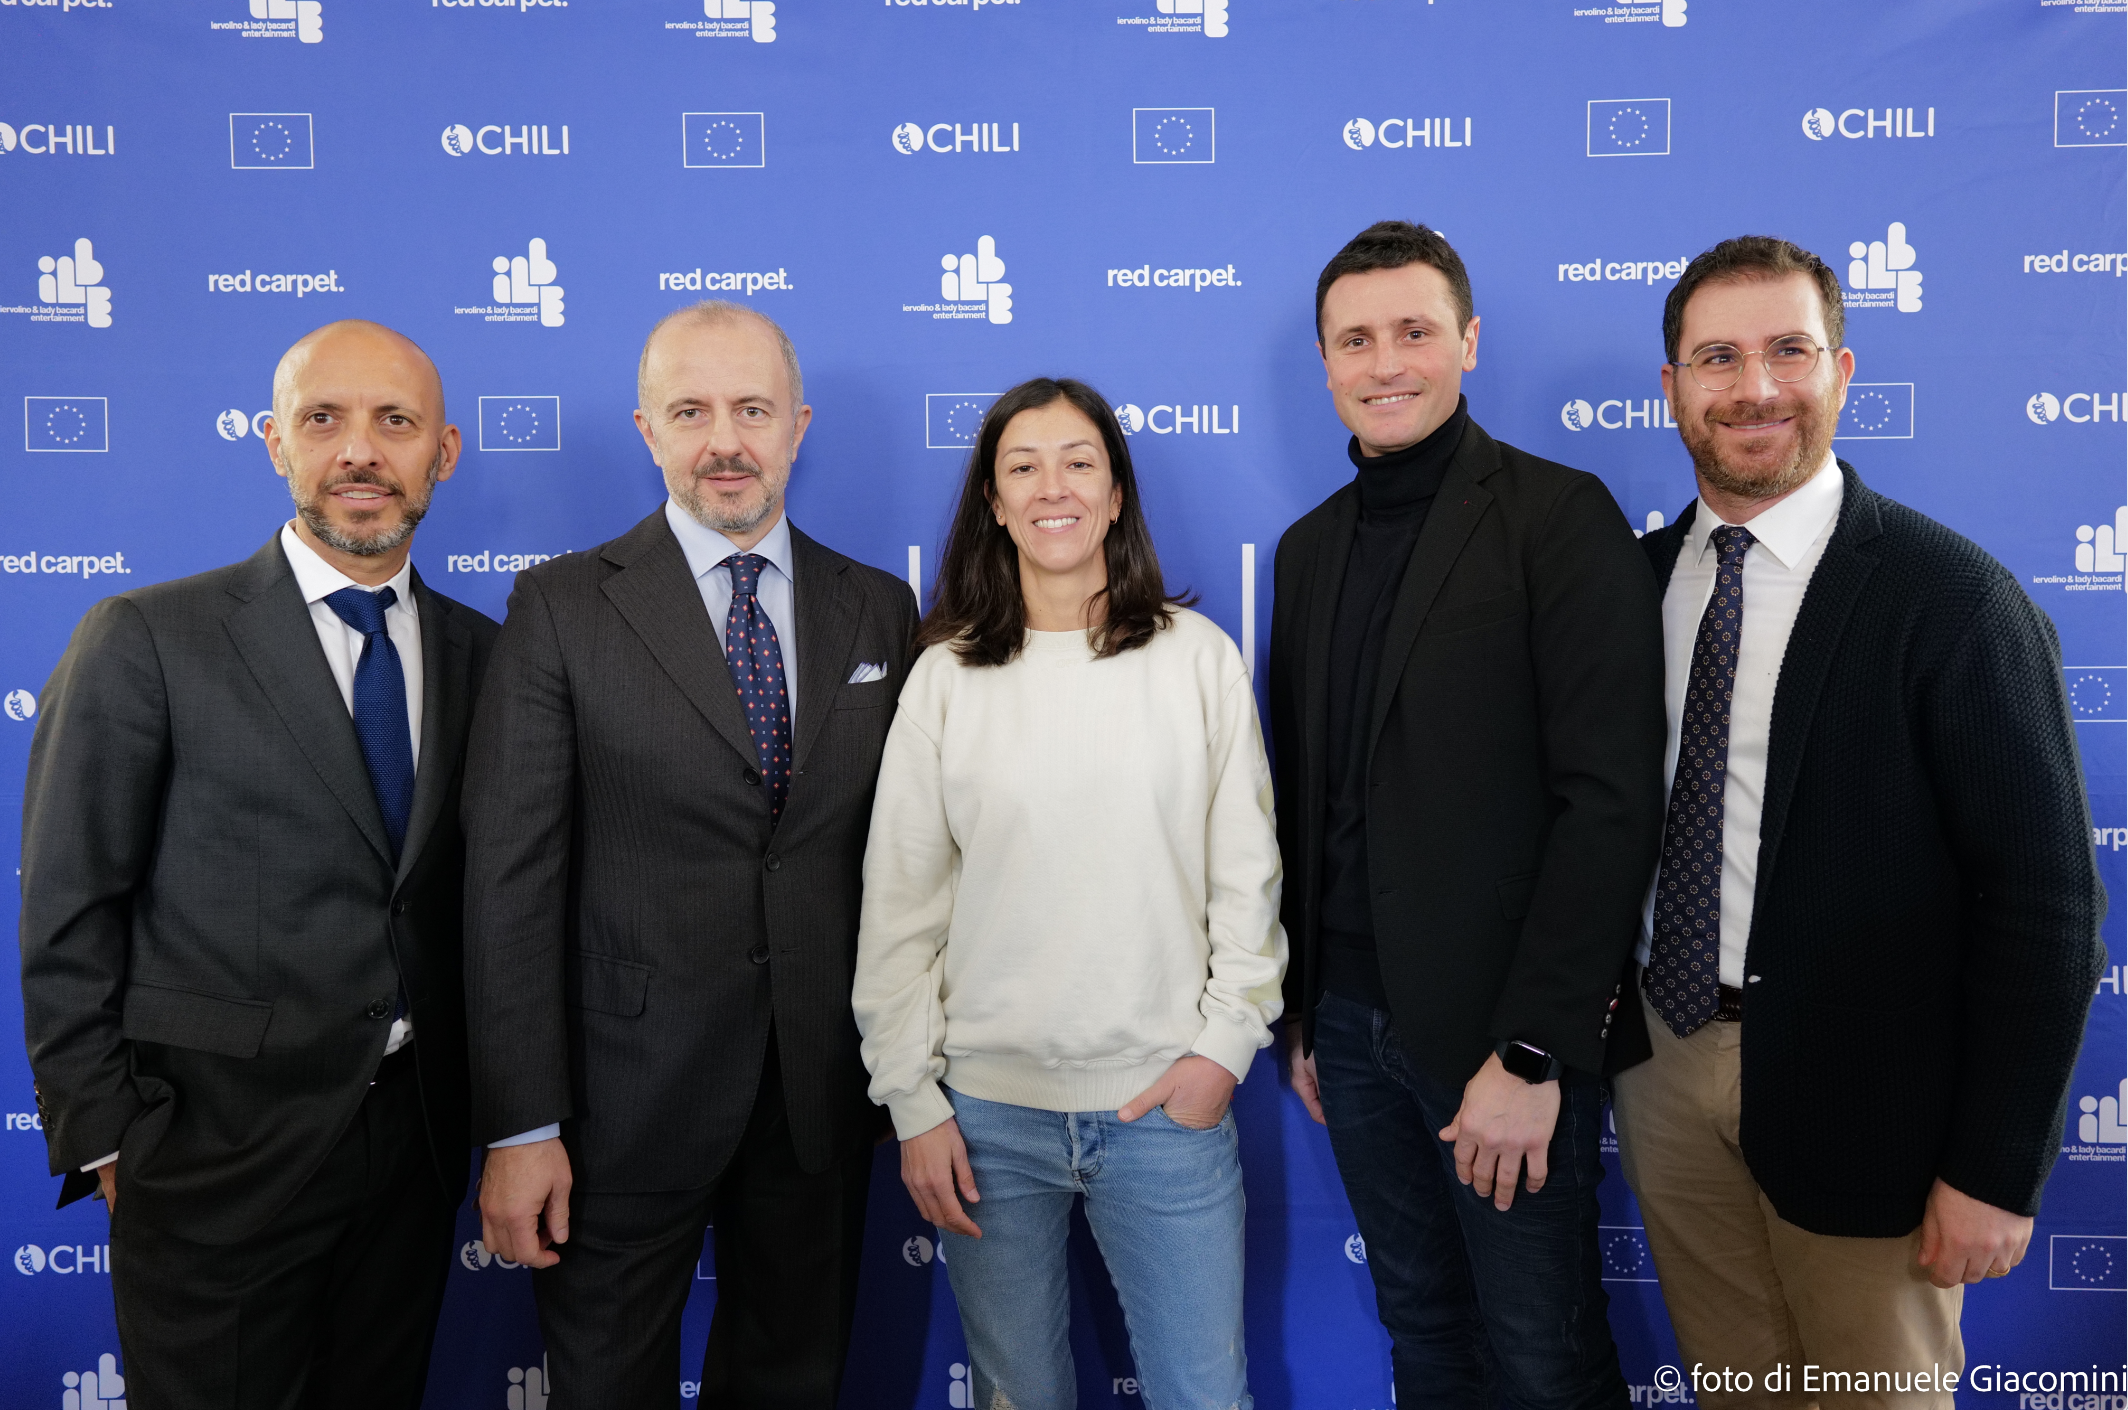 Conferenza-stampa-serie-sport-ale-europe-streaming-chili-red-carpet